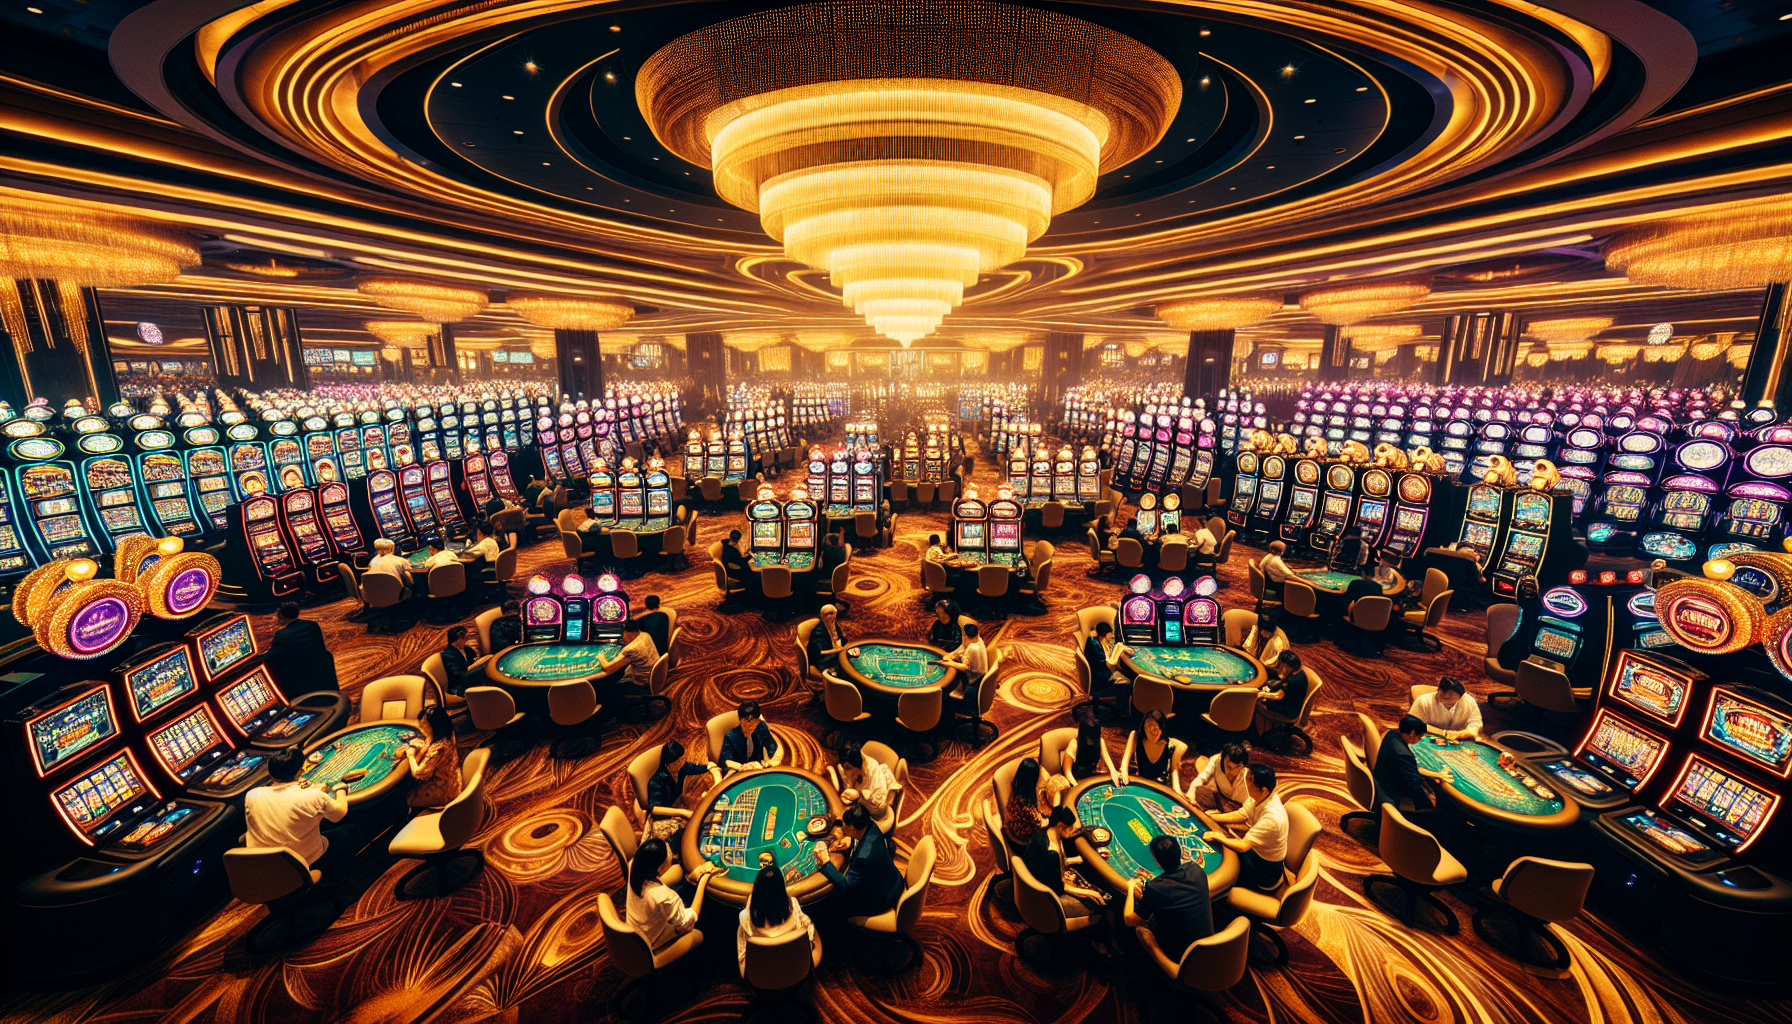 Diverse casino floor with slot machines and table games